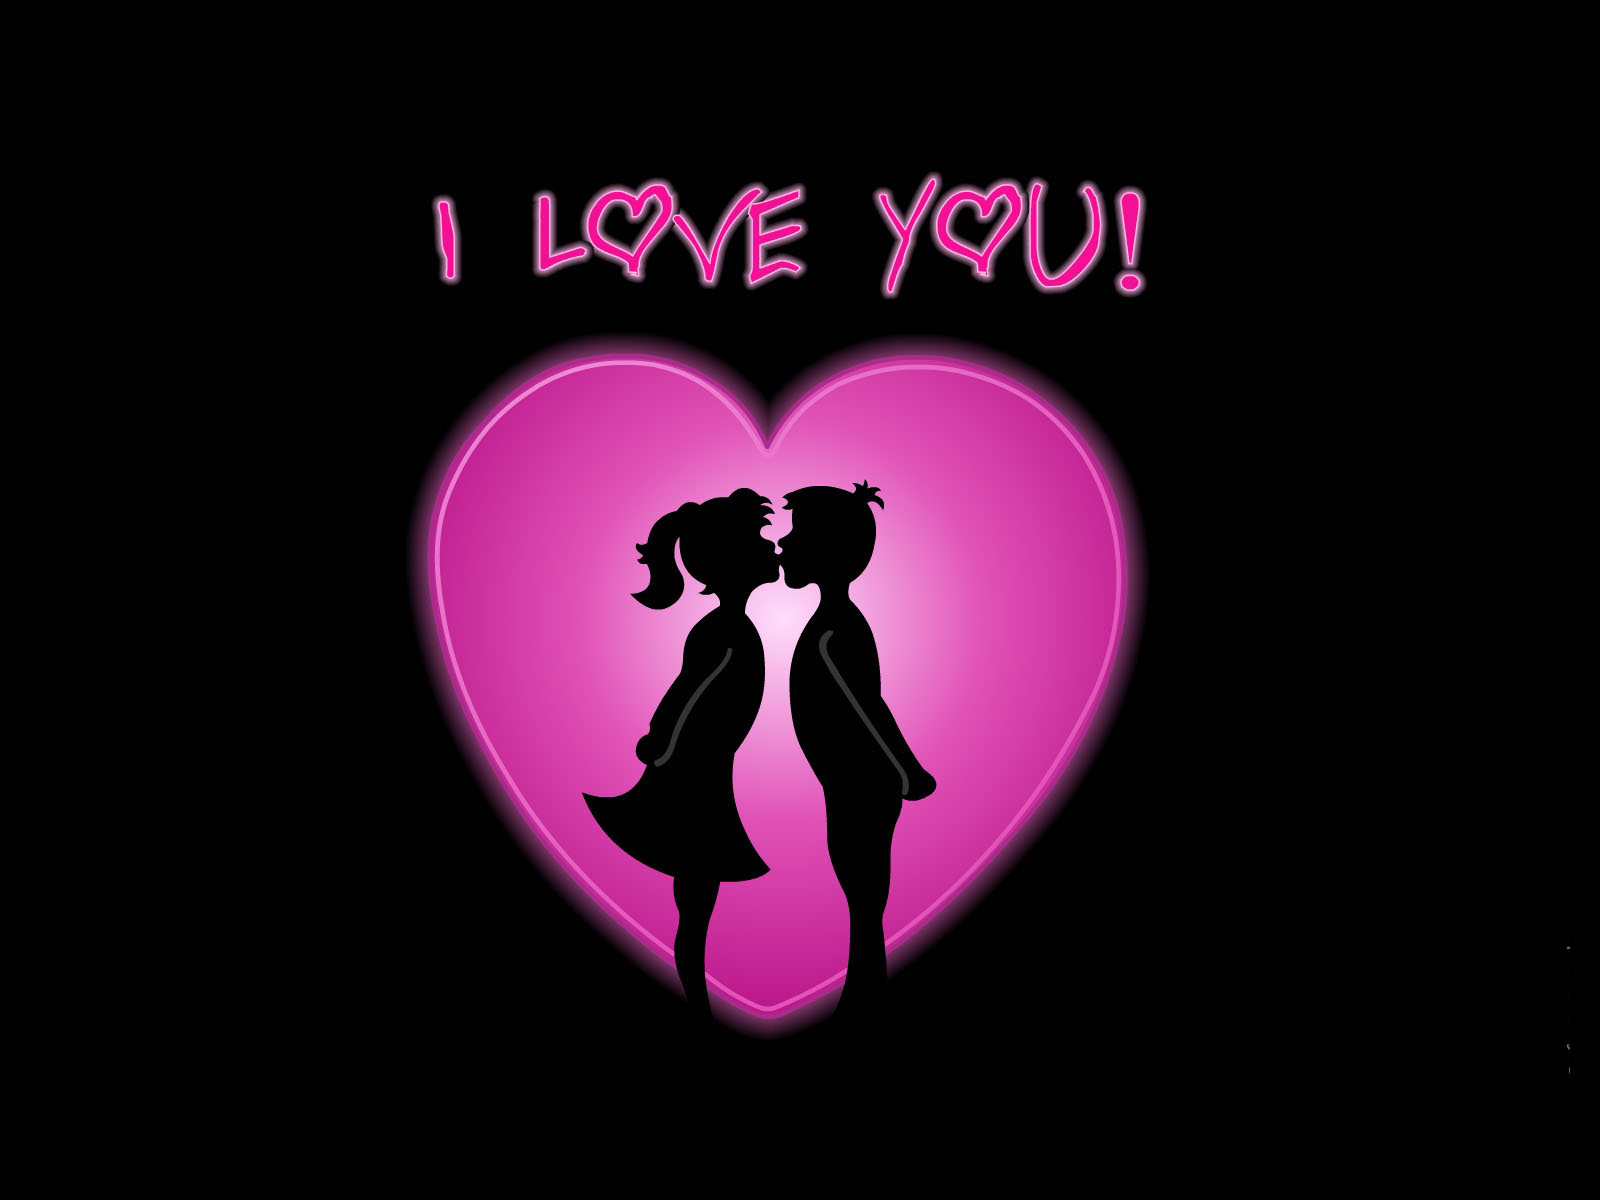 I love you lovers kiss clipart with pink heart normal wallpapers